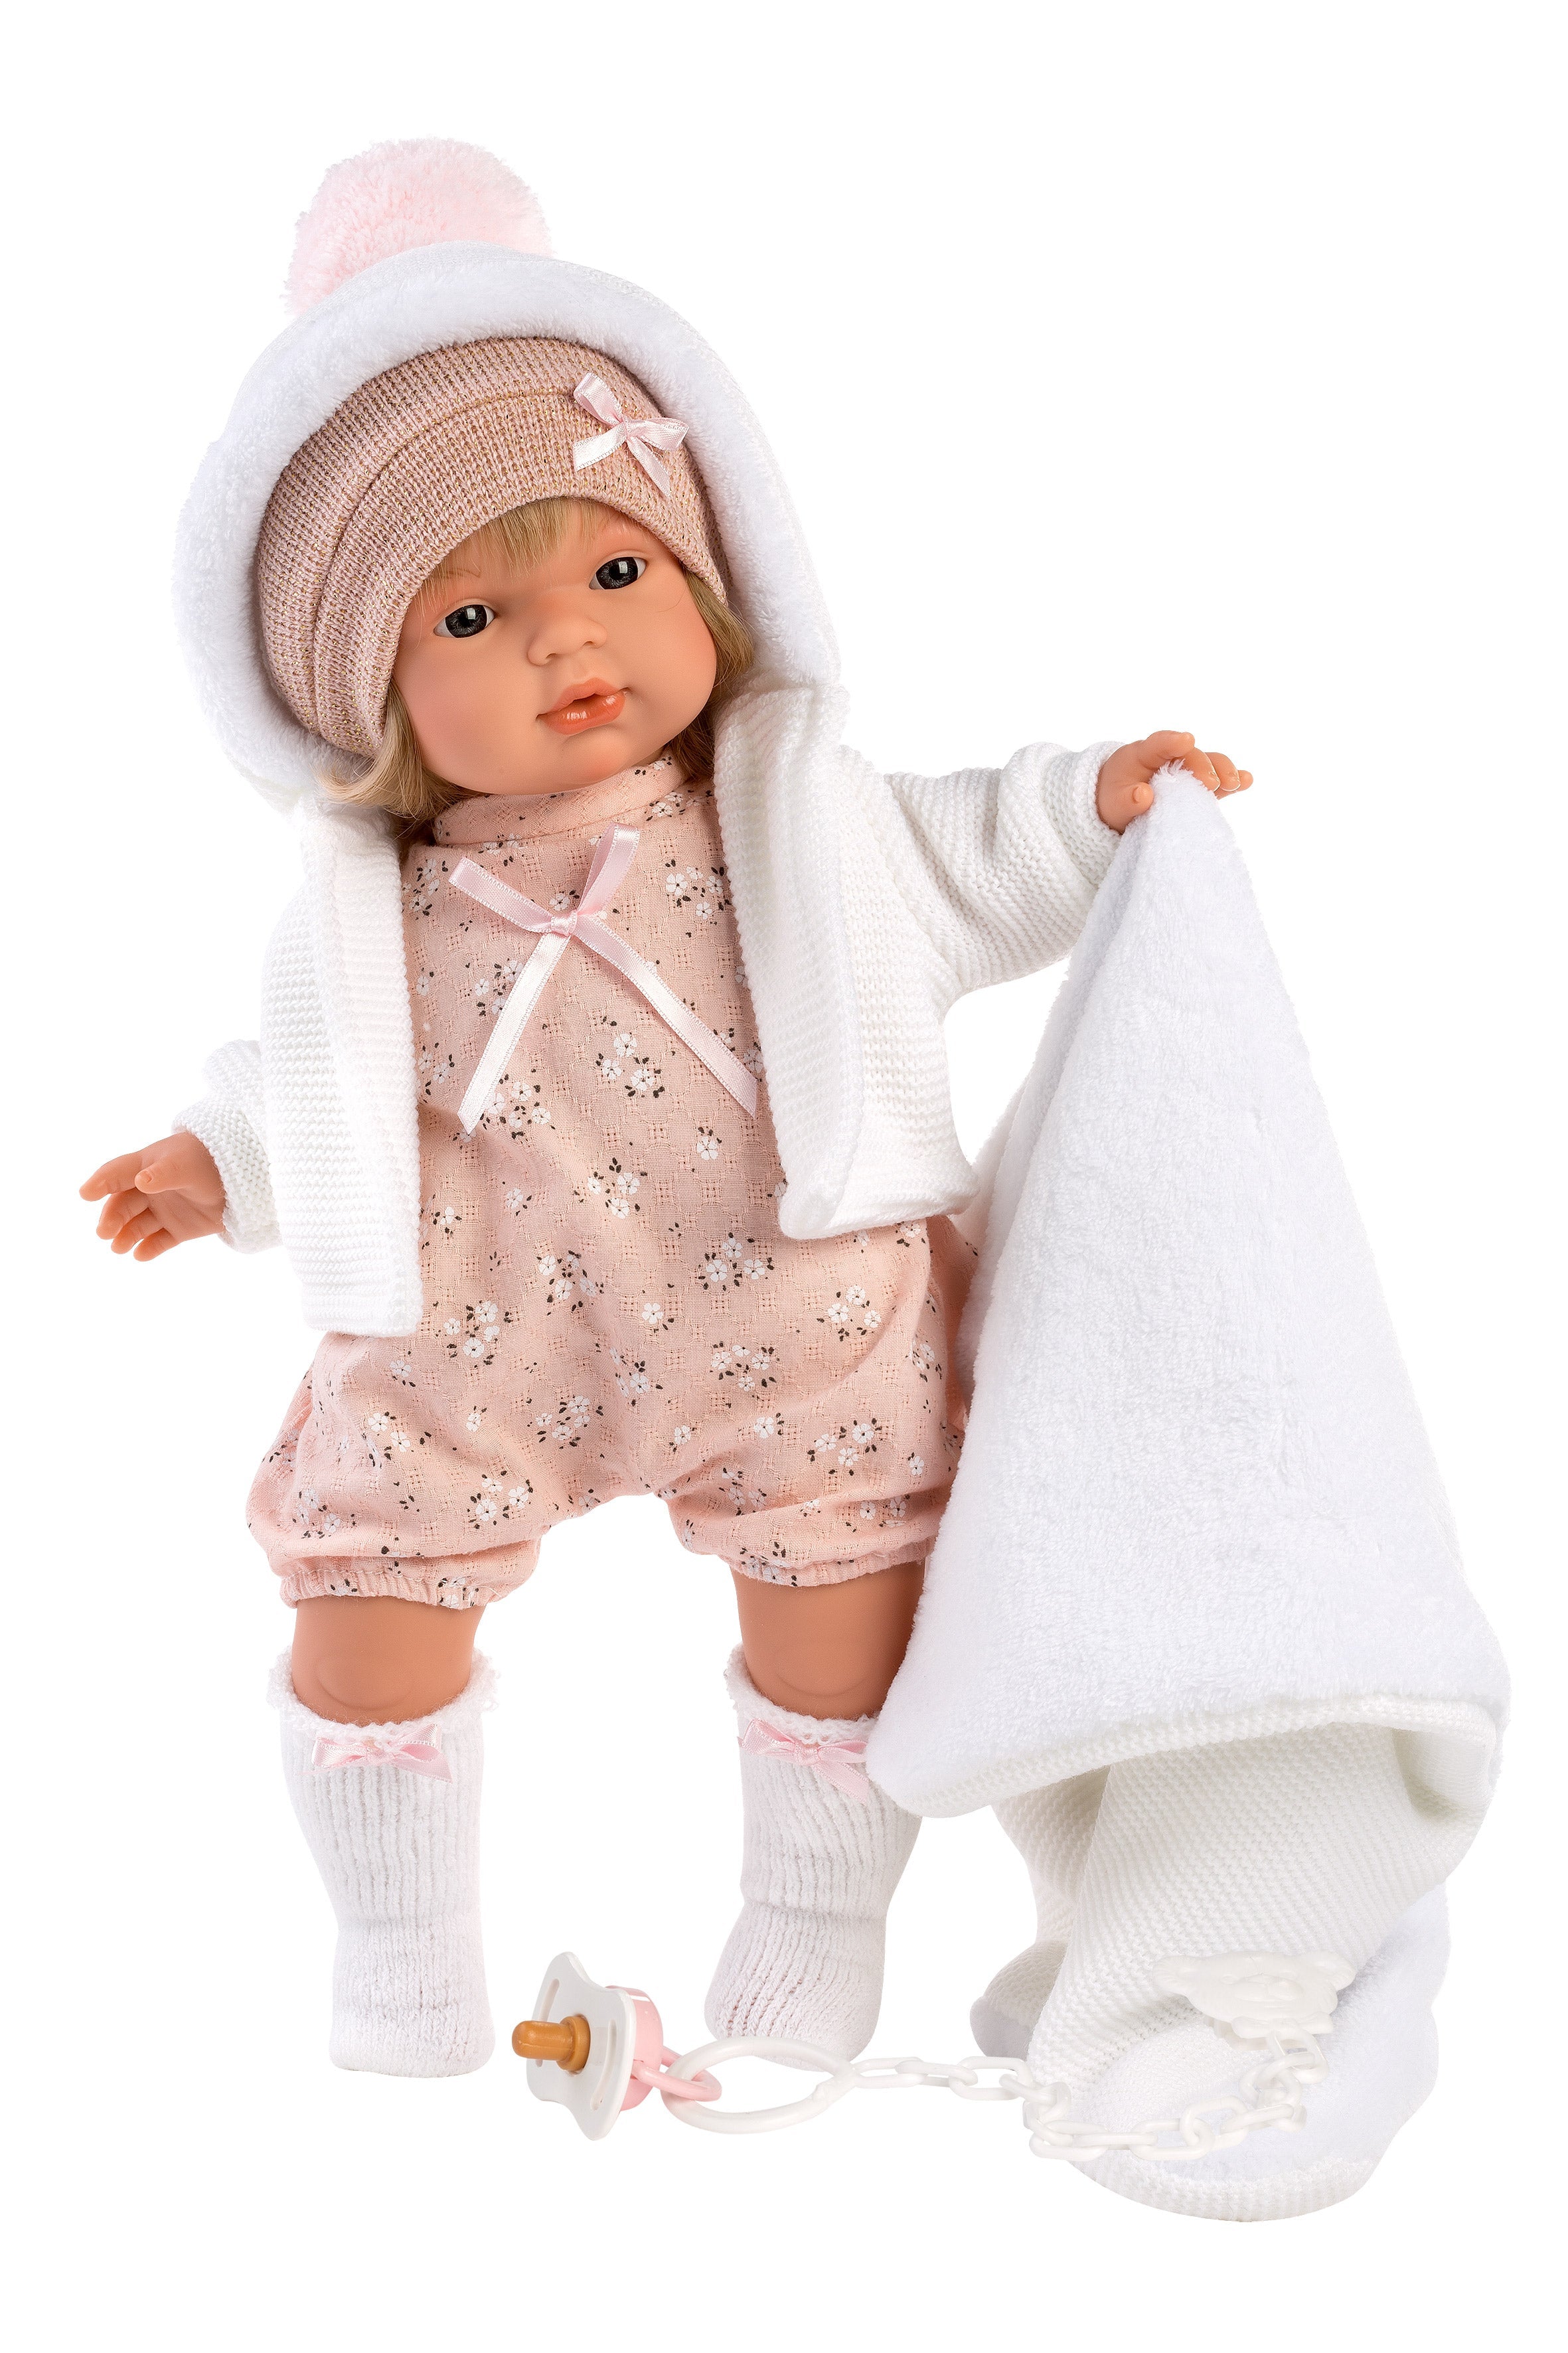 Llorens 15" Soft Body Crying Baby Doll Mandy with Blanket Dolls